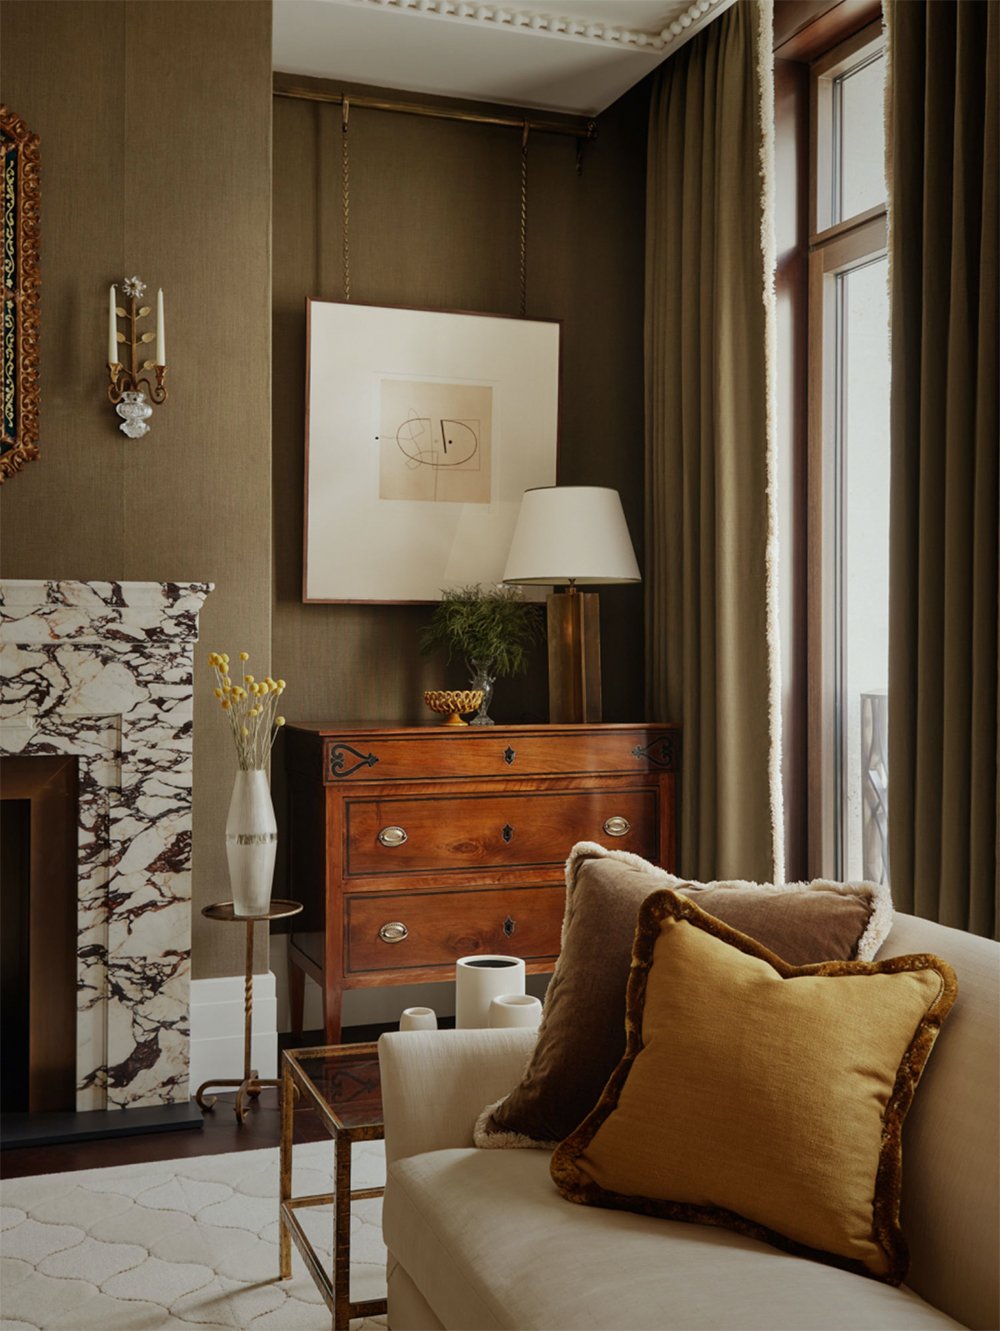 Home Tour : Central London Townhouse - roomfortuesday.com